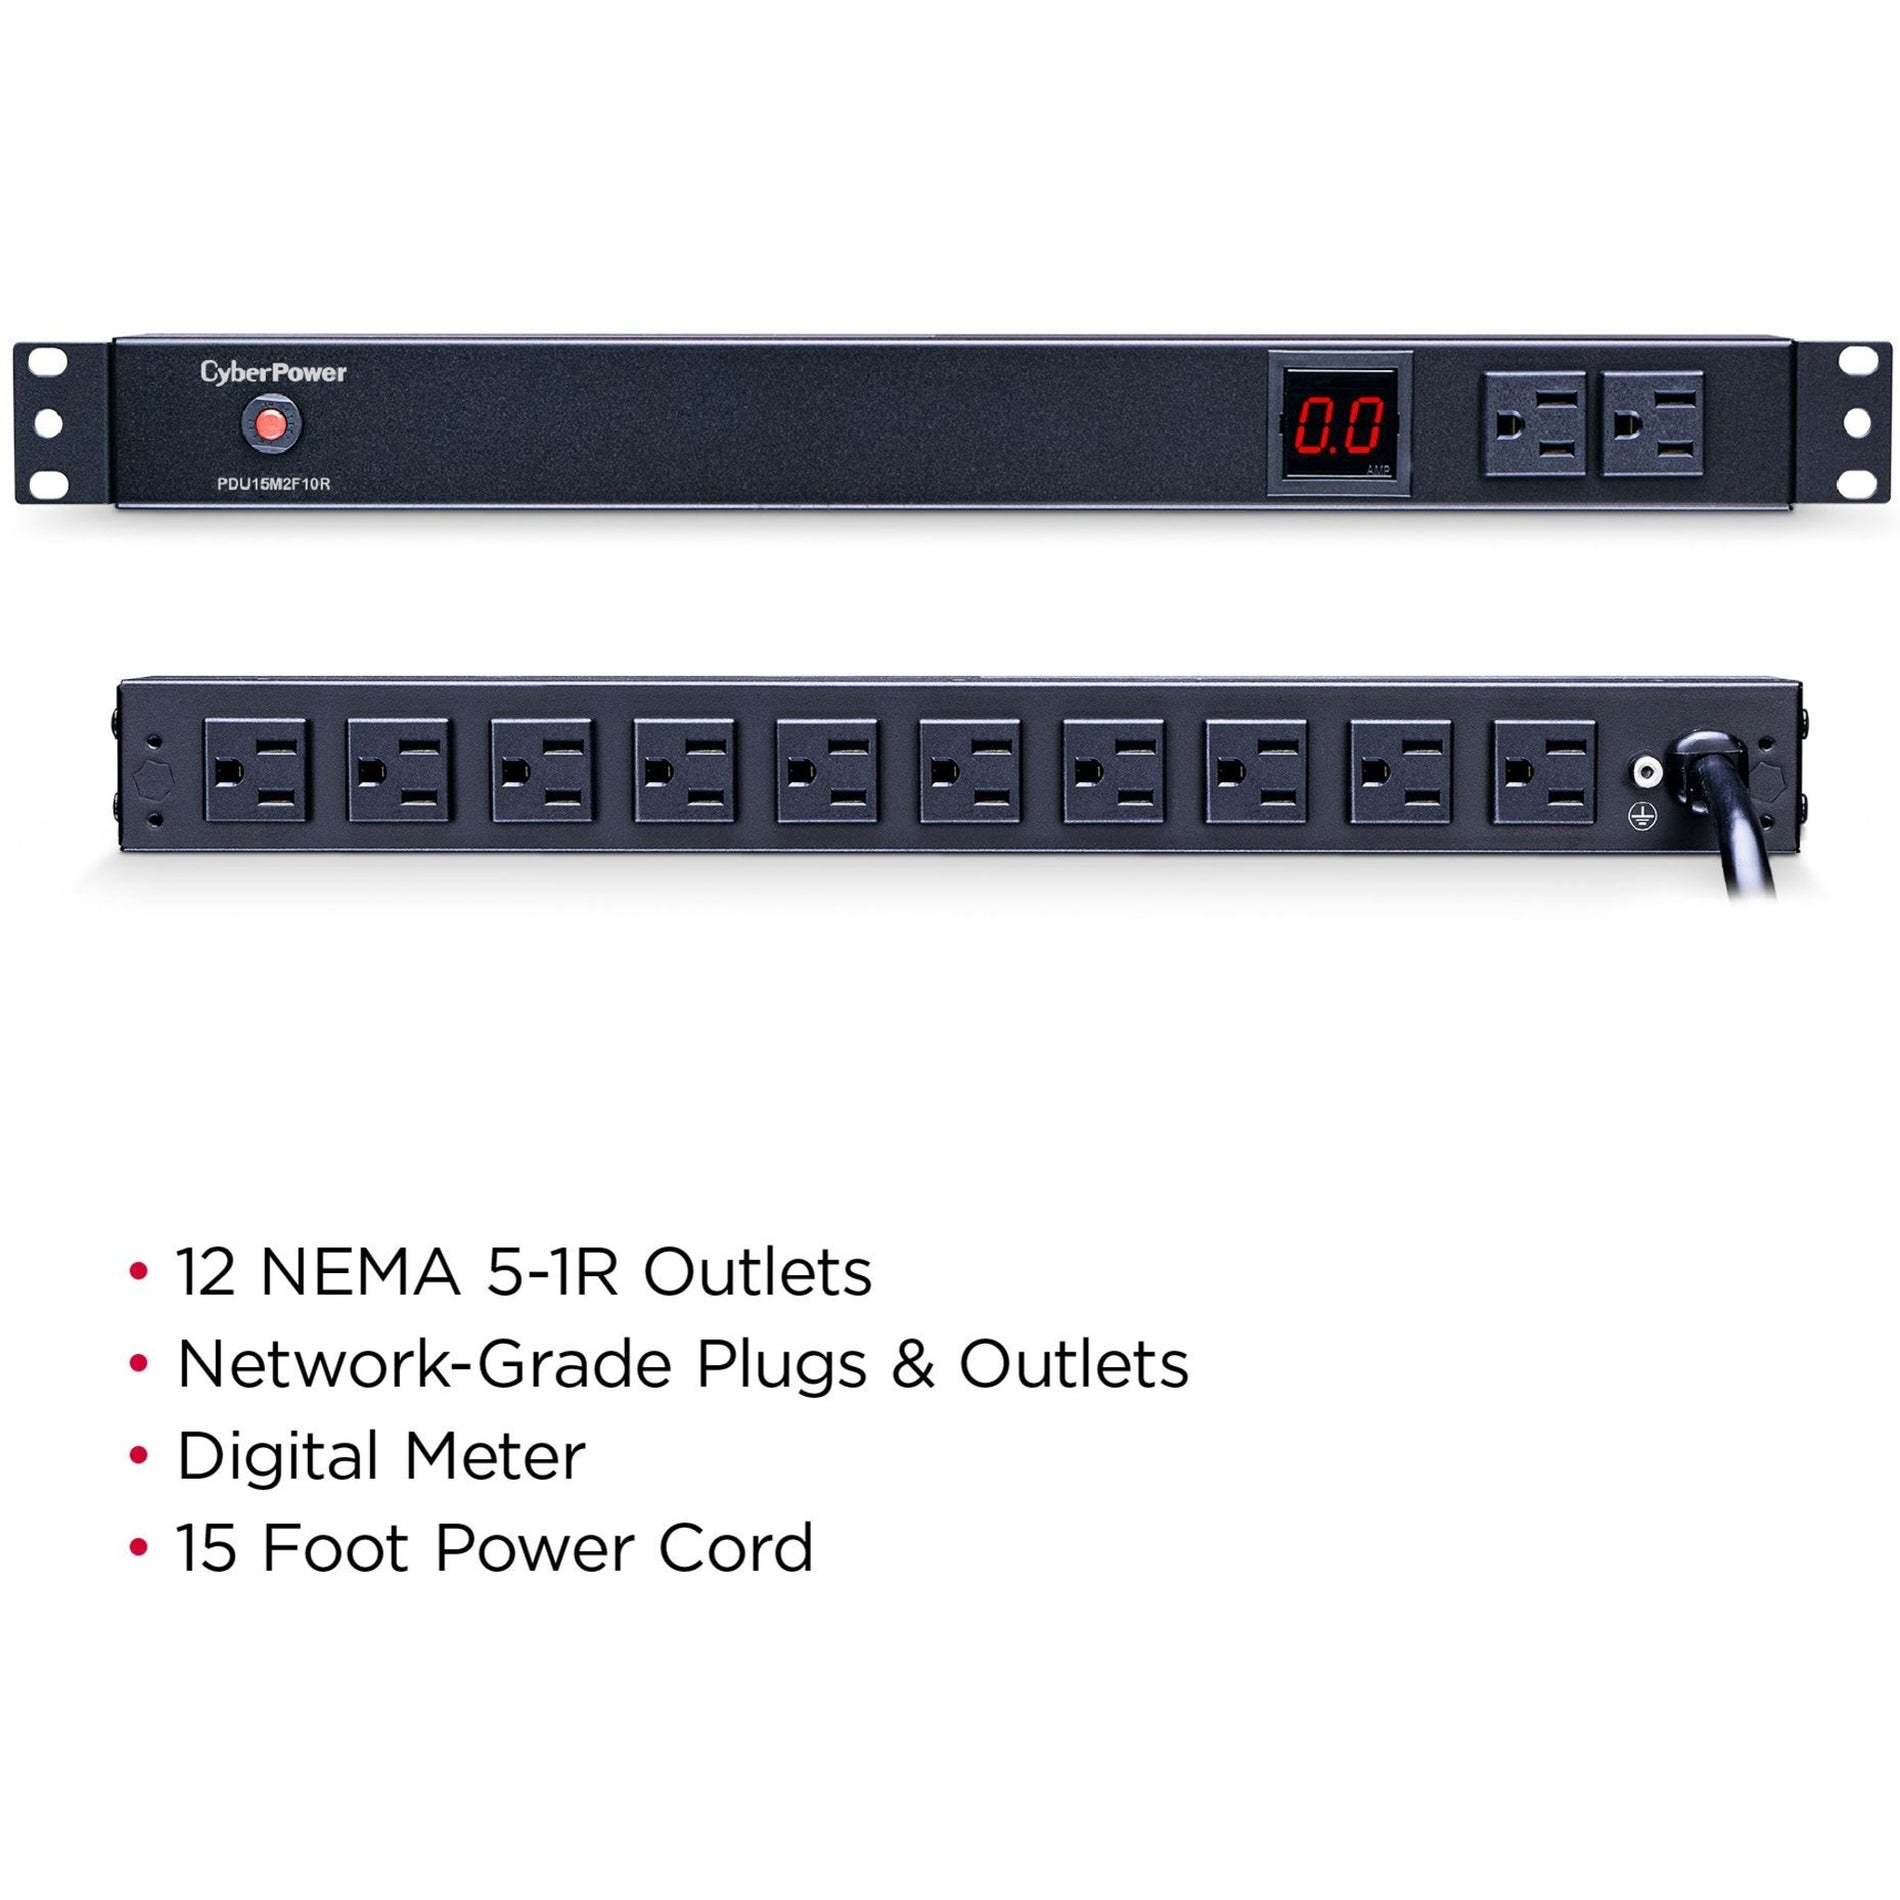 CyberPower PDU15M2F10R 12-Outlets PDU 100-125VAC 15A Metered Power Distribution Unit